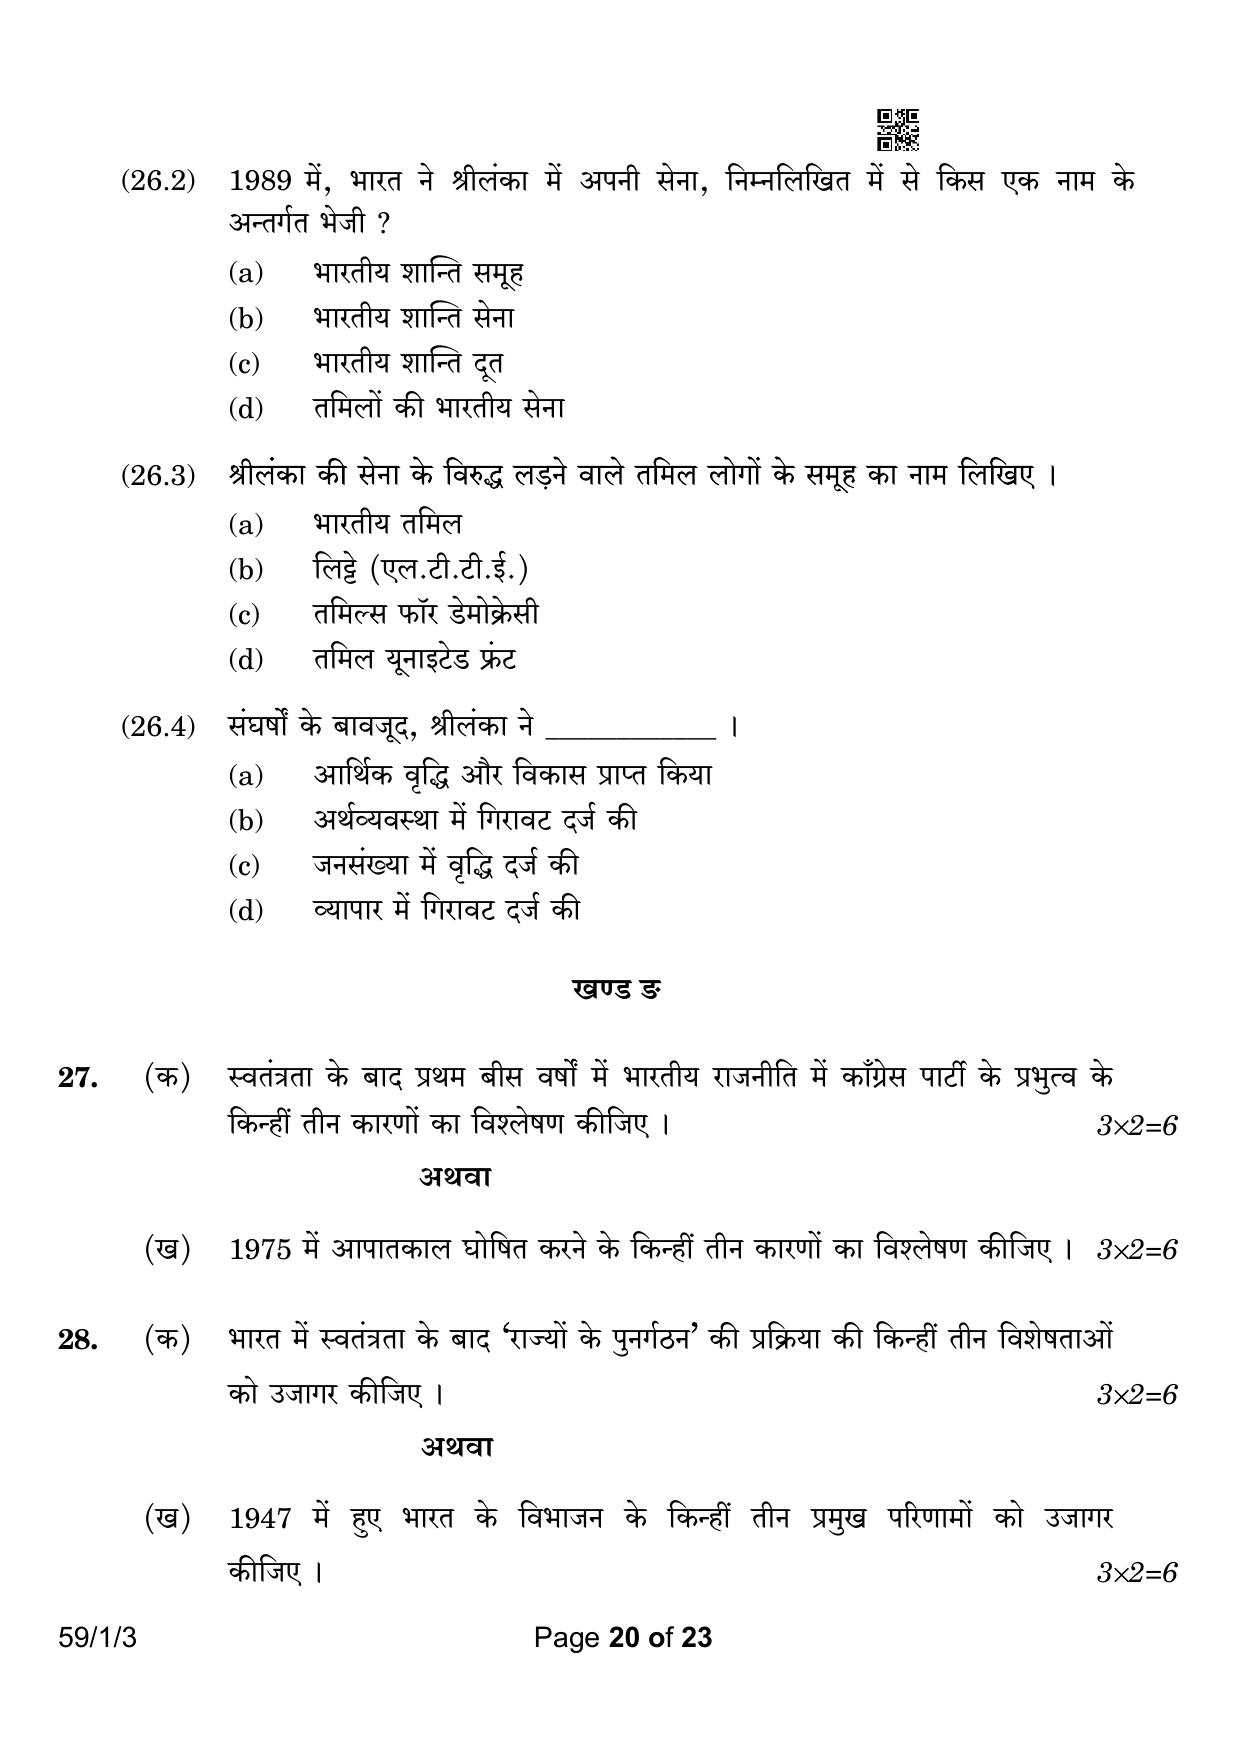 CBSE Class 12 59-1-3 Political Science 2023 Question Paper - Page 20